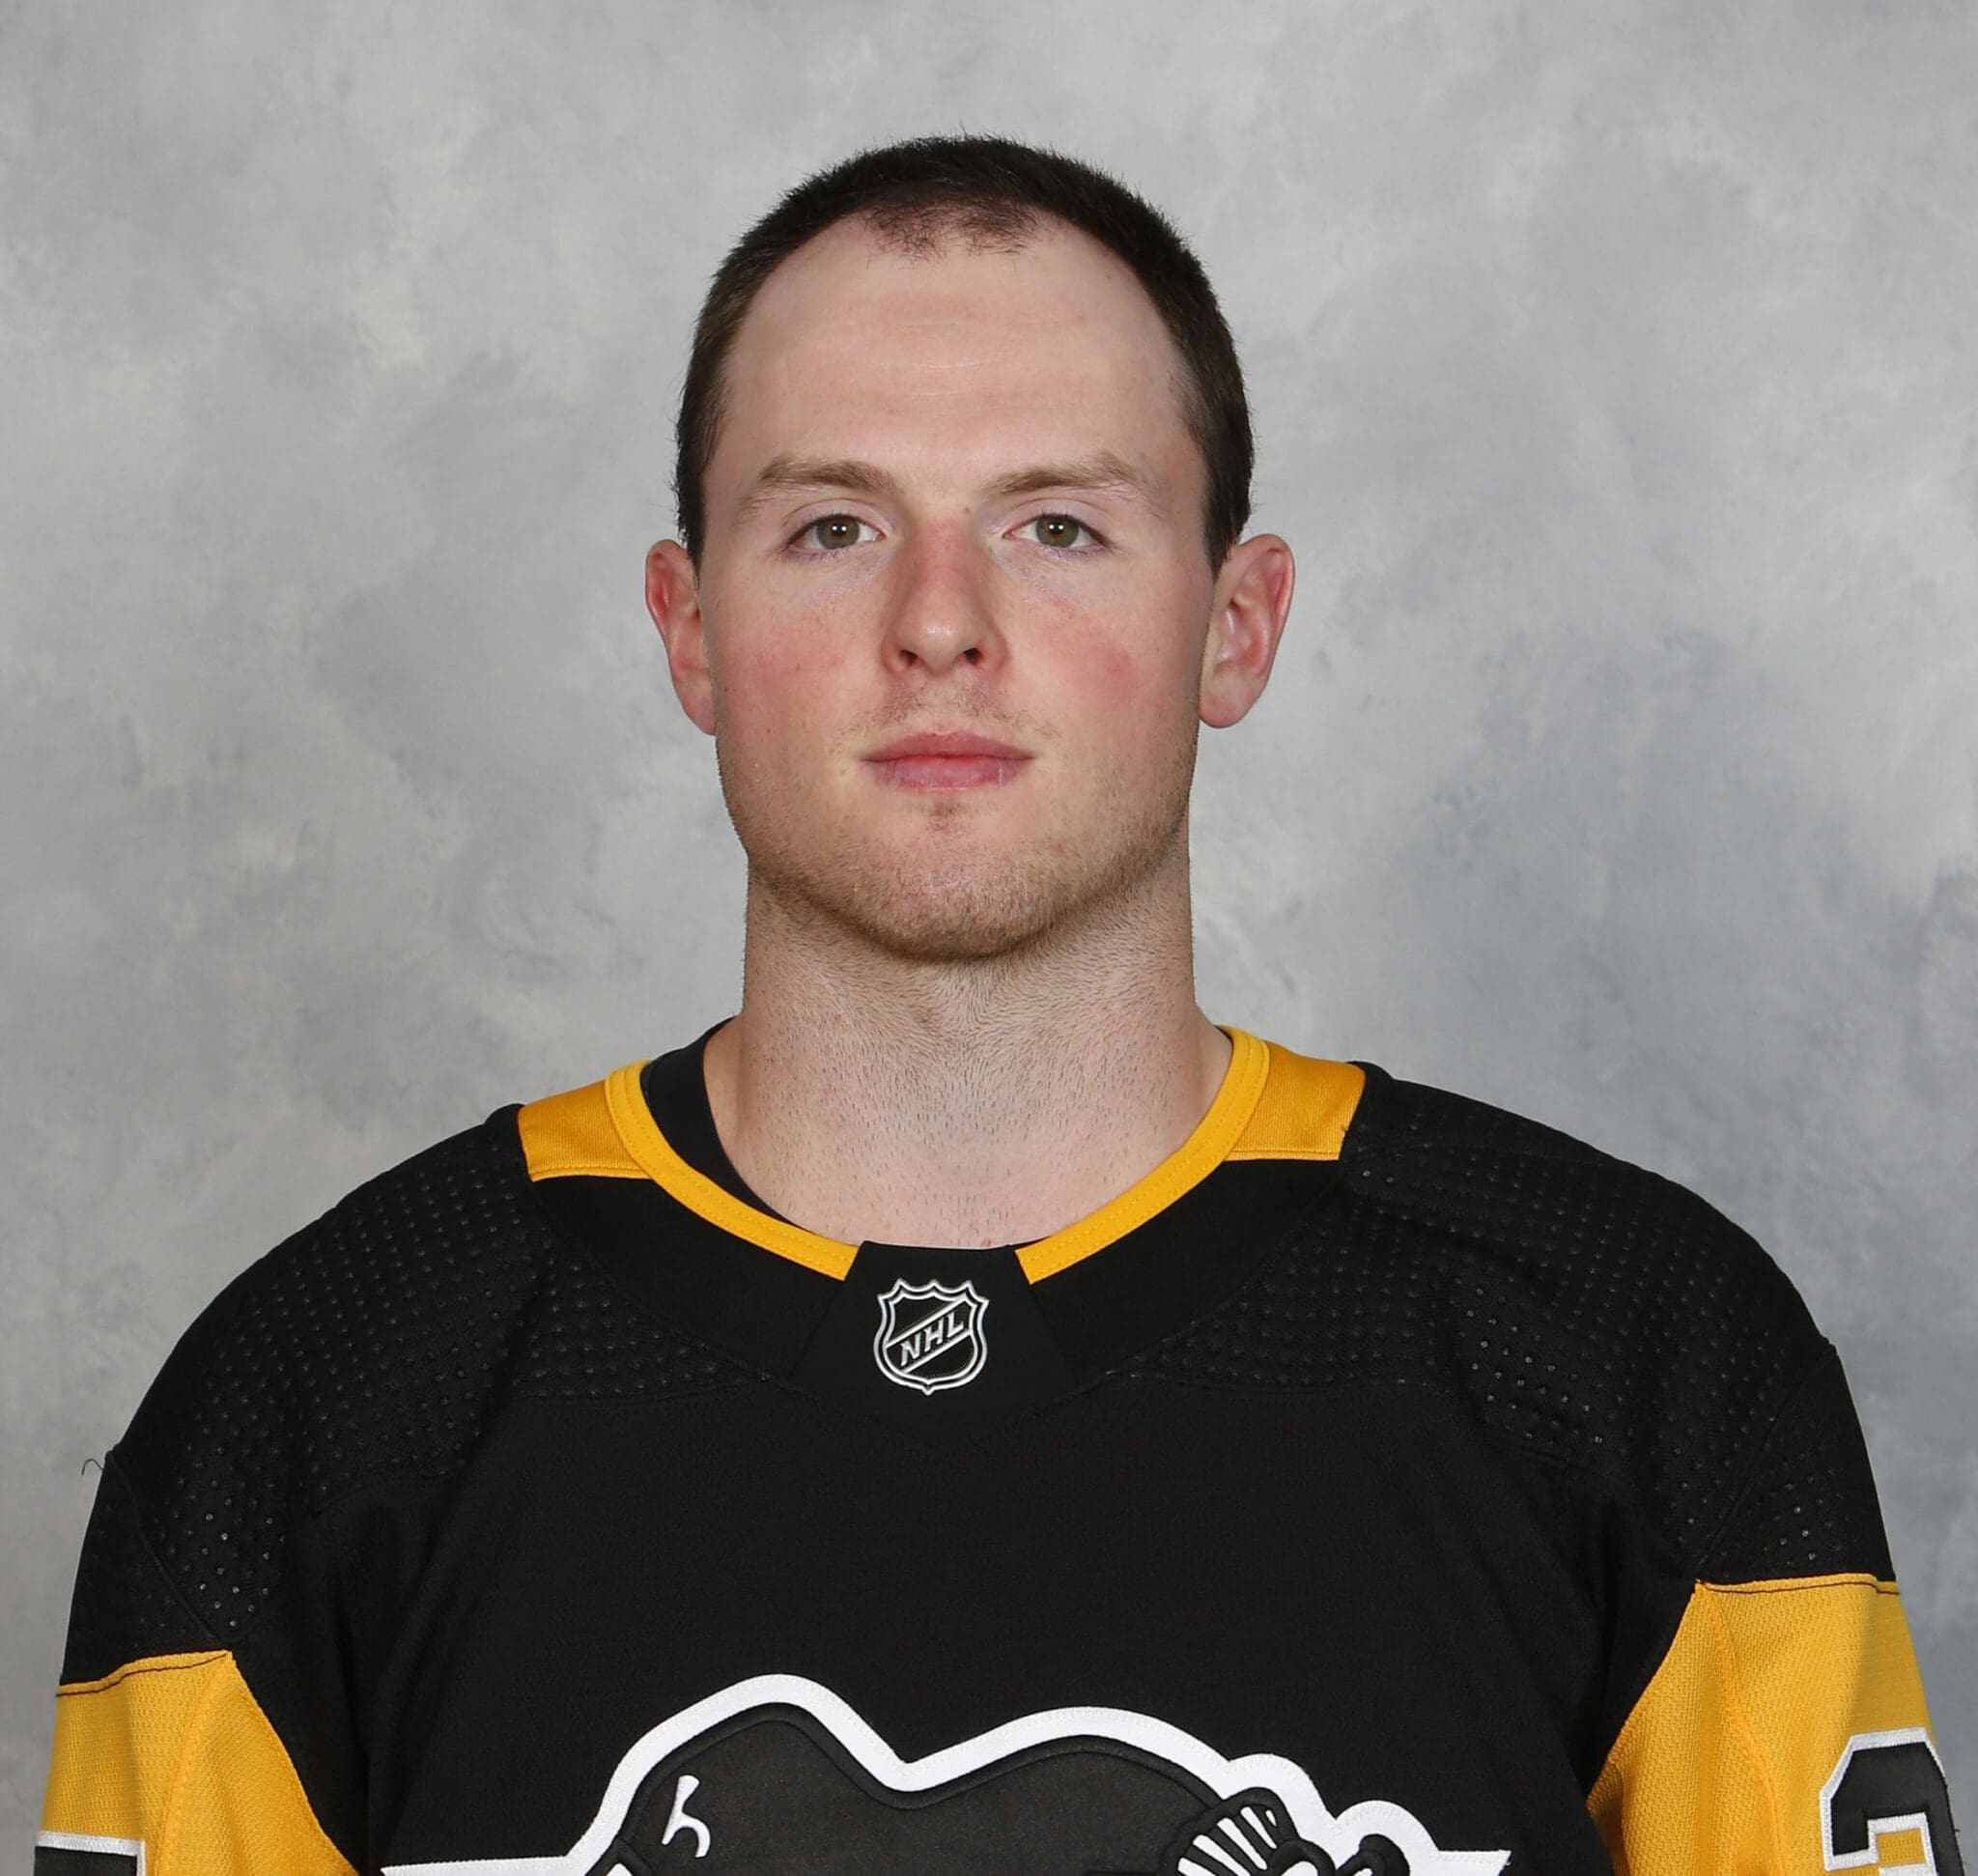 Holidaysburg, PA native Sam Lafferty signs with the Pens